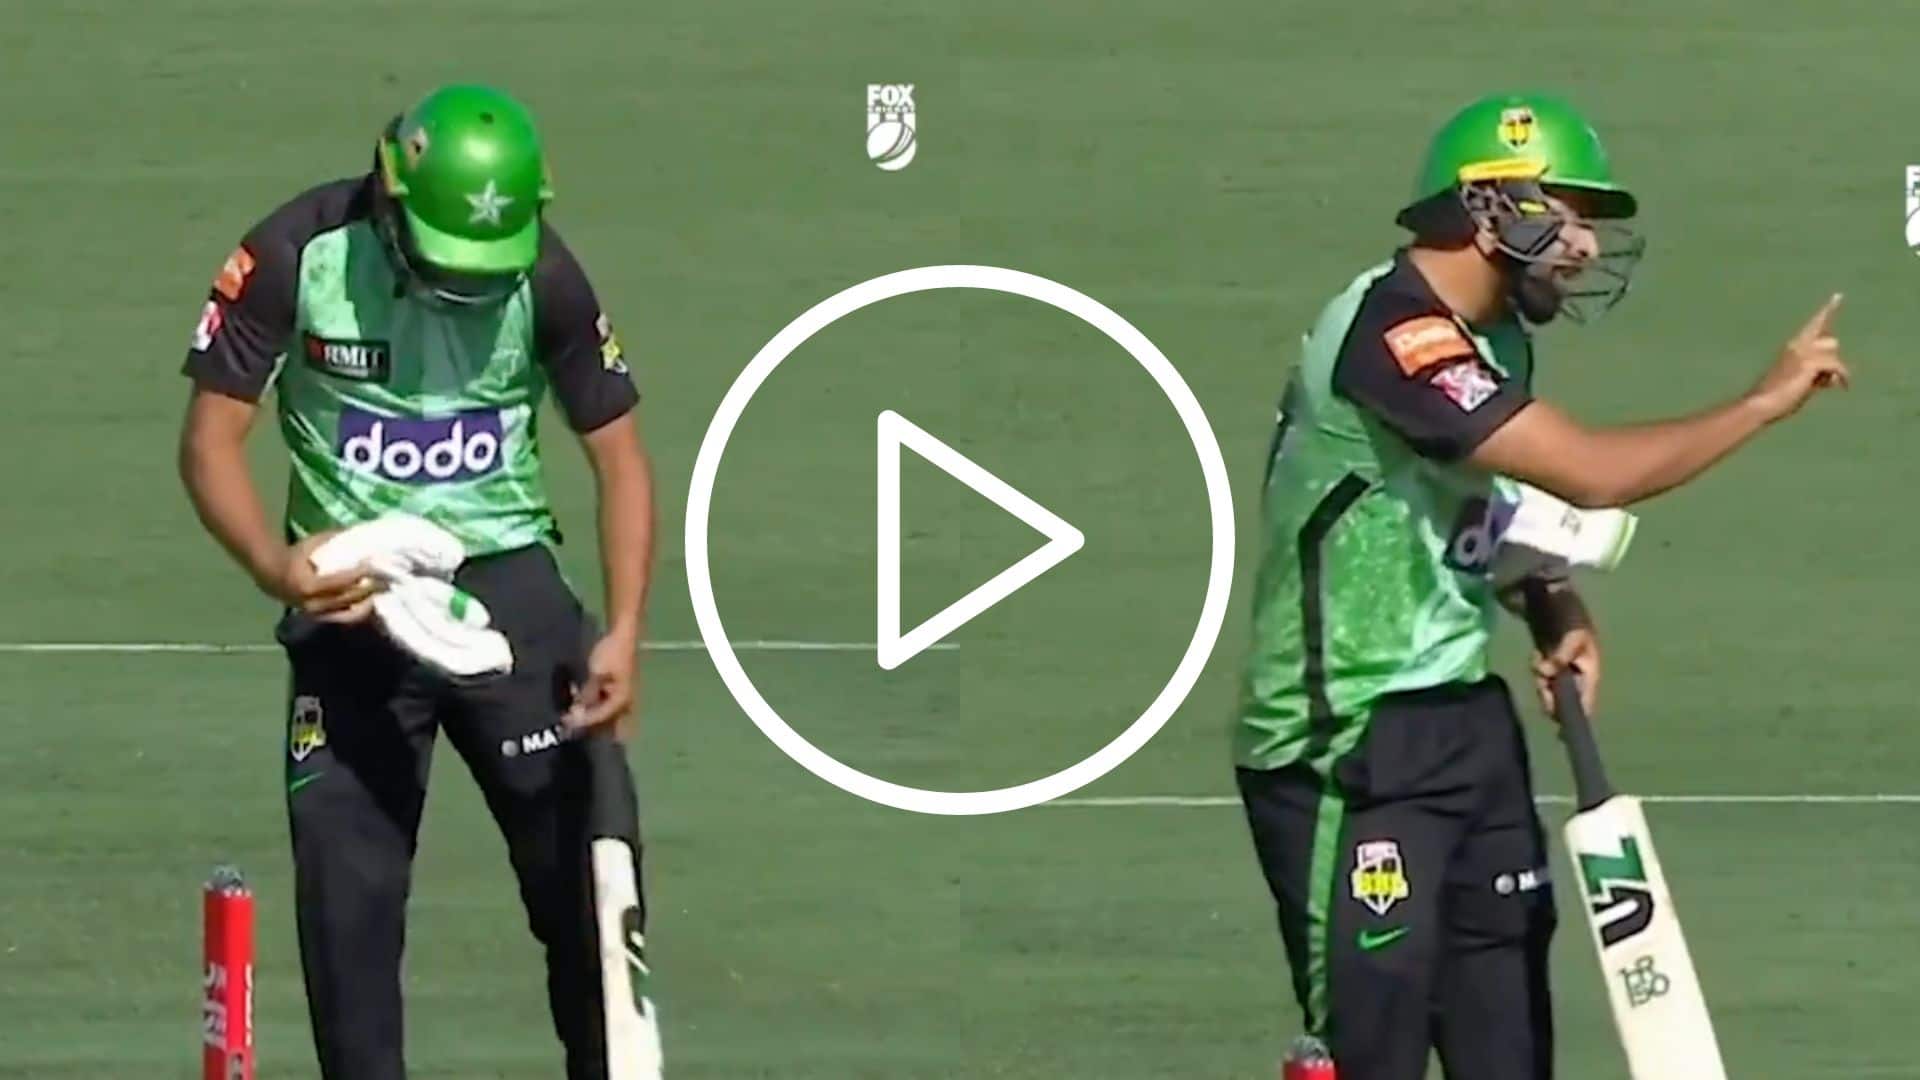 [Watch] Haris Rauf Walks Out Without Pads; Umpires Ask To Take Helmet, Gloves Later